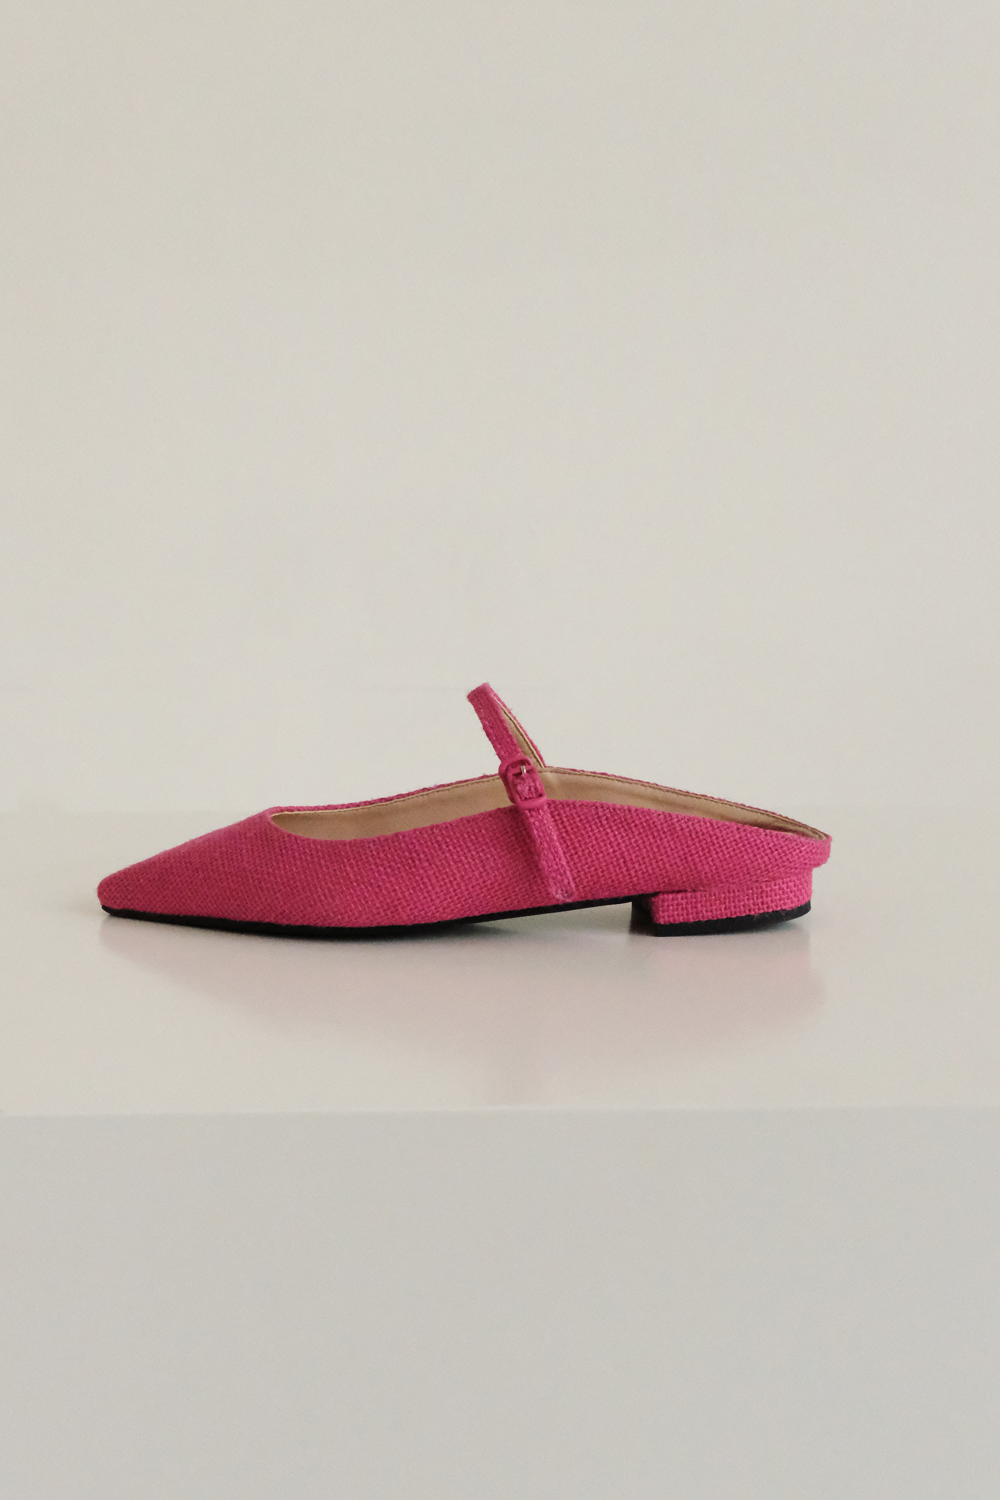 ANTHÈSE mary jane flat mule, linen hot pink (10%)